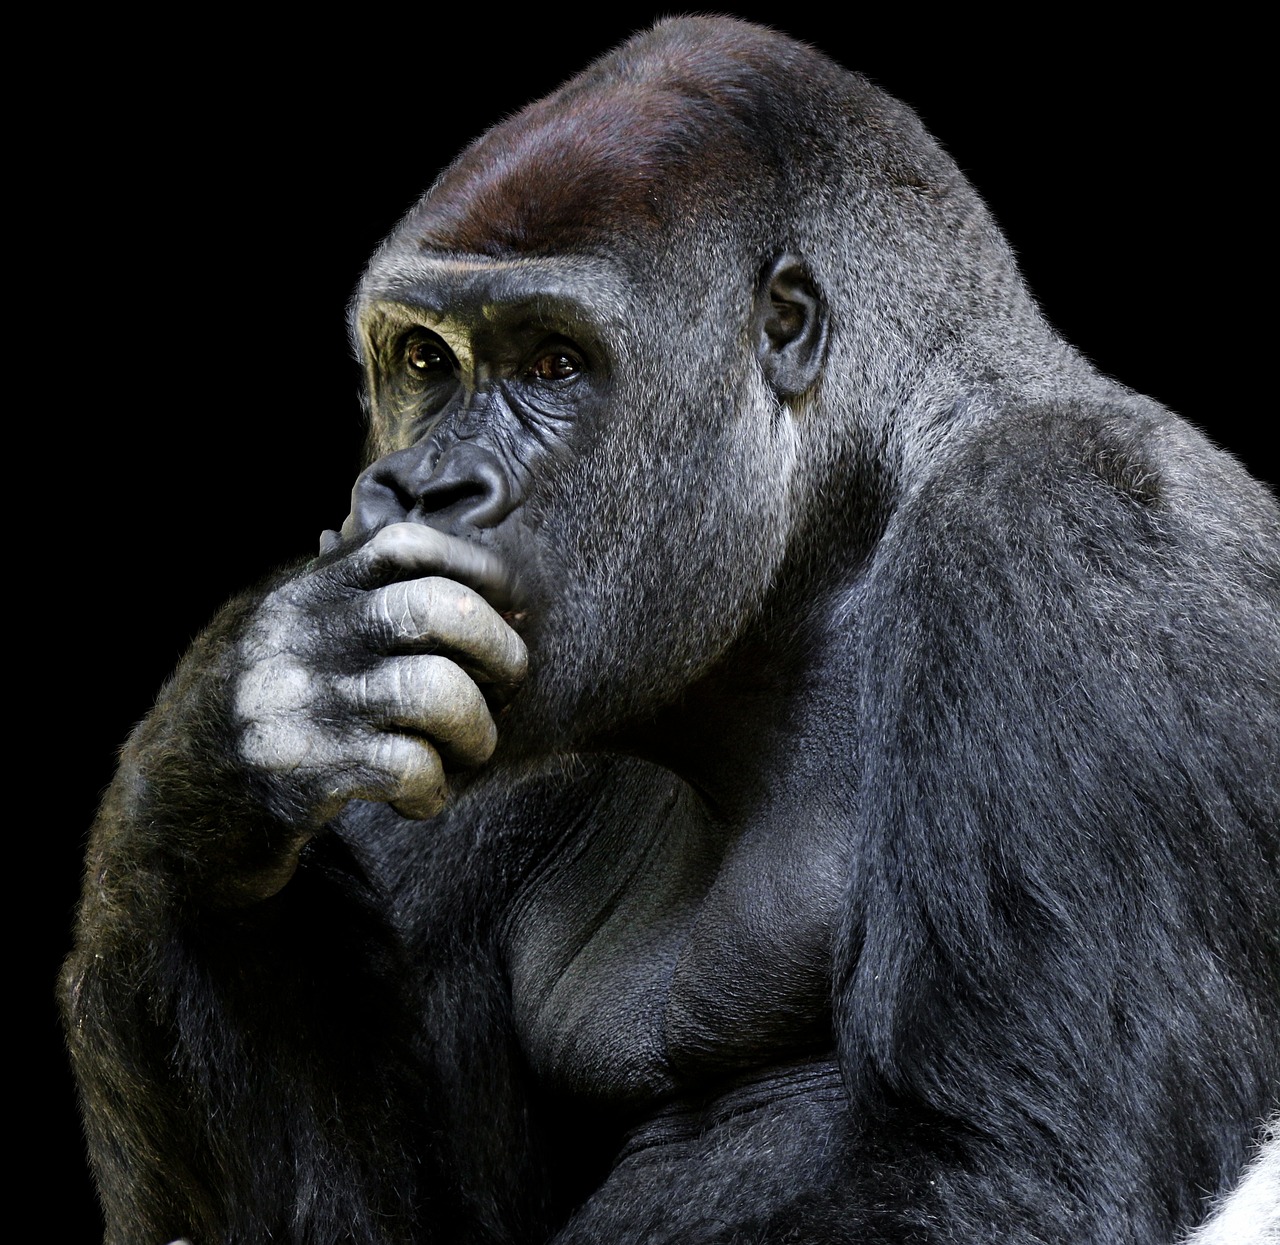 a gorilla sitting in front of a black background, shutterstock, primitivism, thinking pose, worried, not intelligent, giant